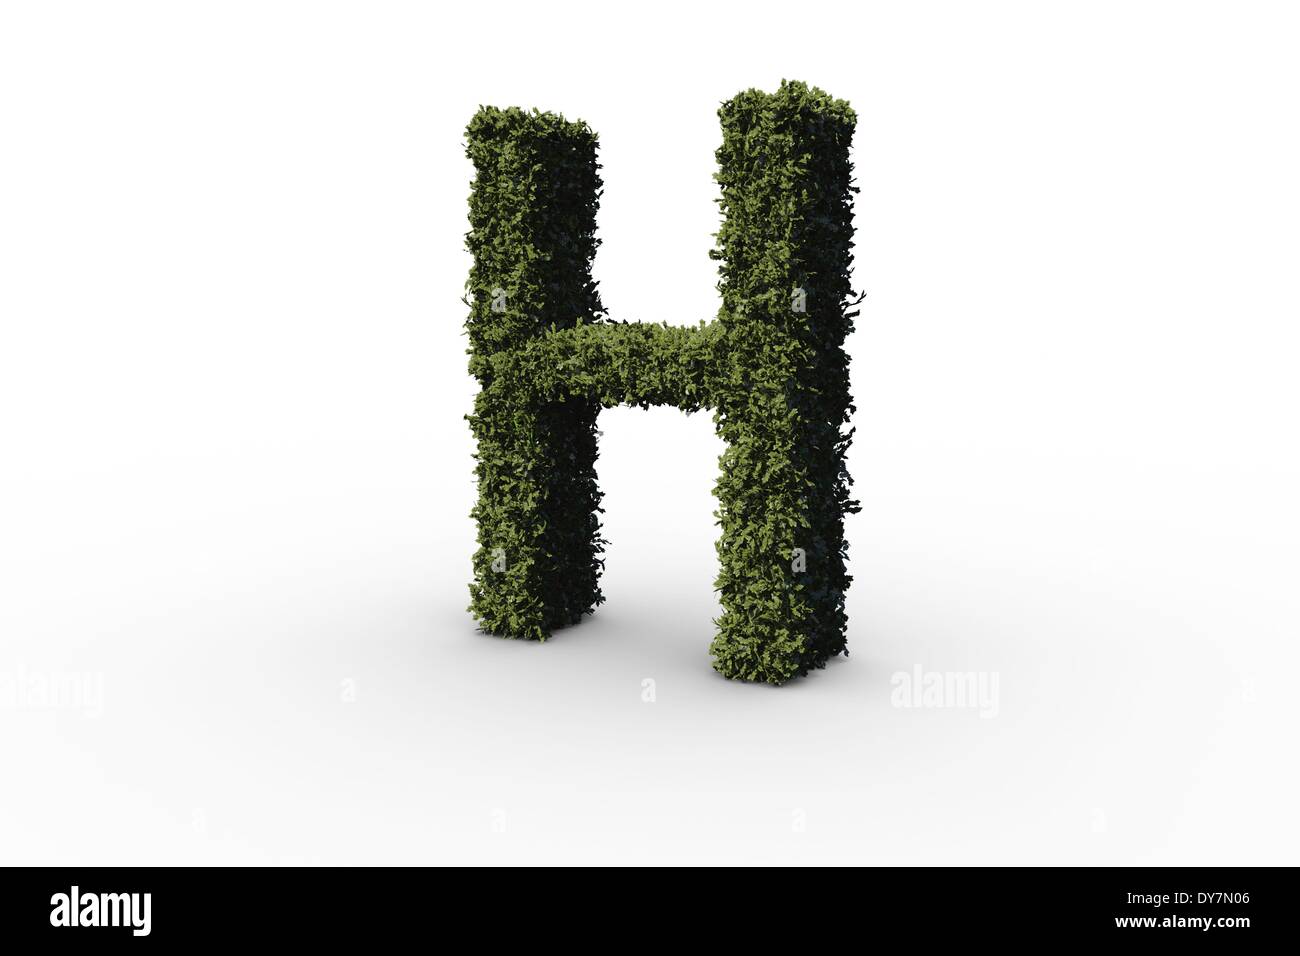 Capital letter h made of leaves Stock Photo